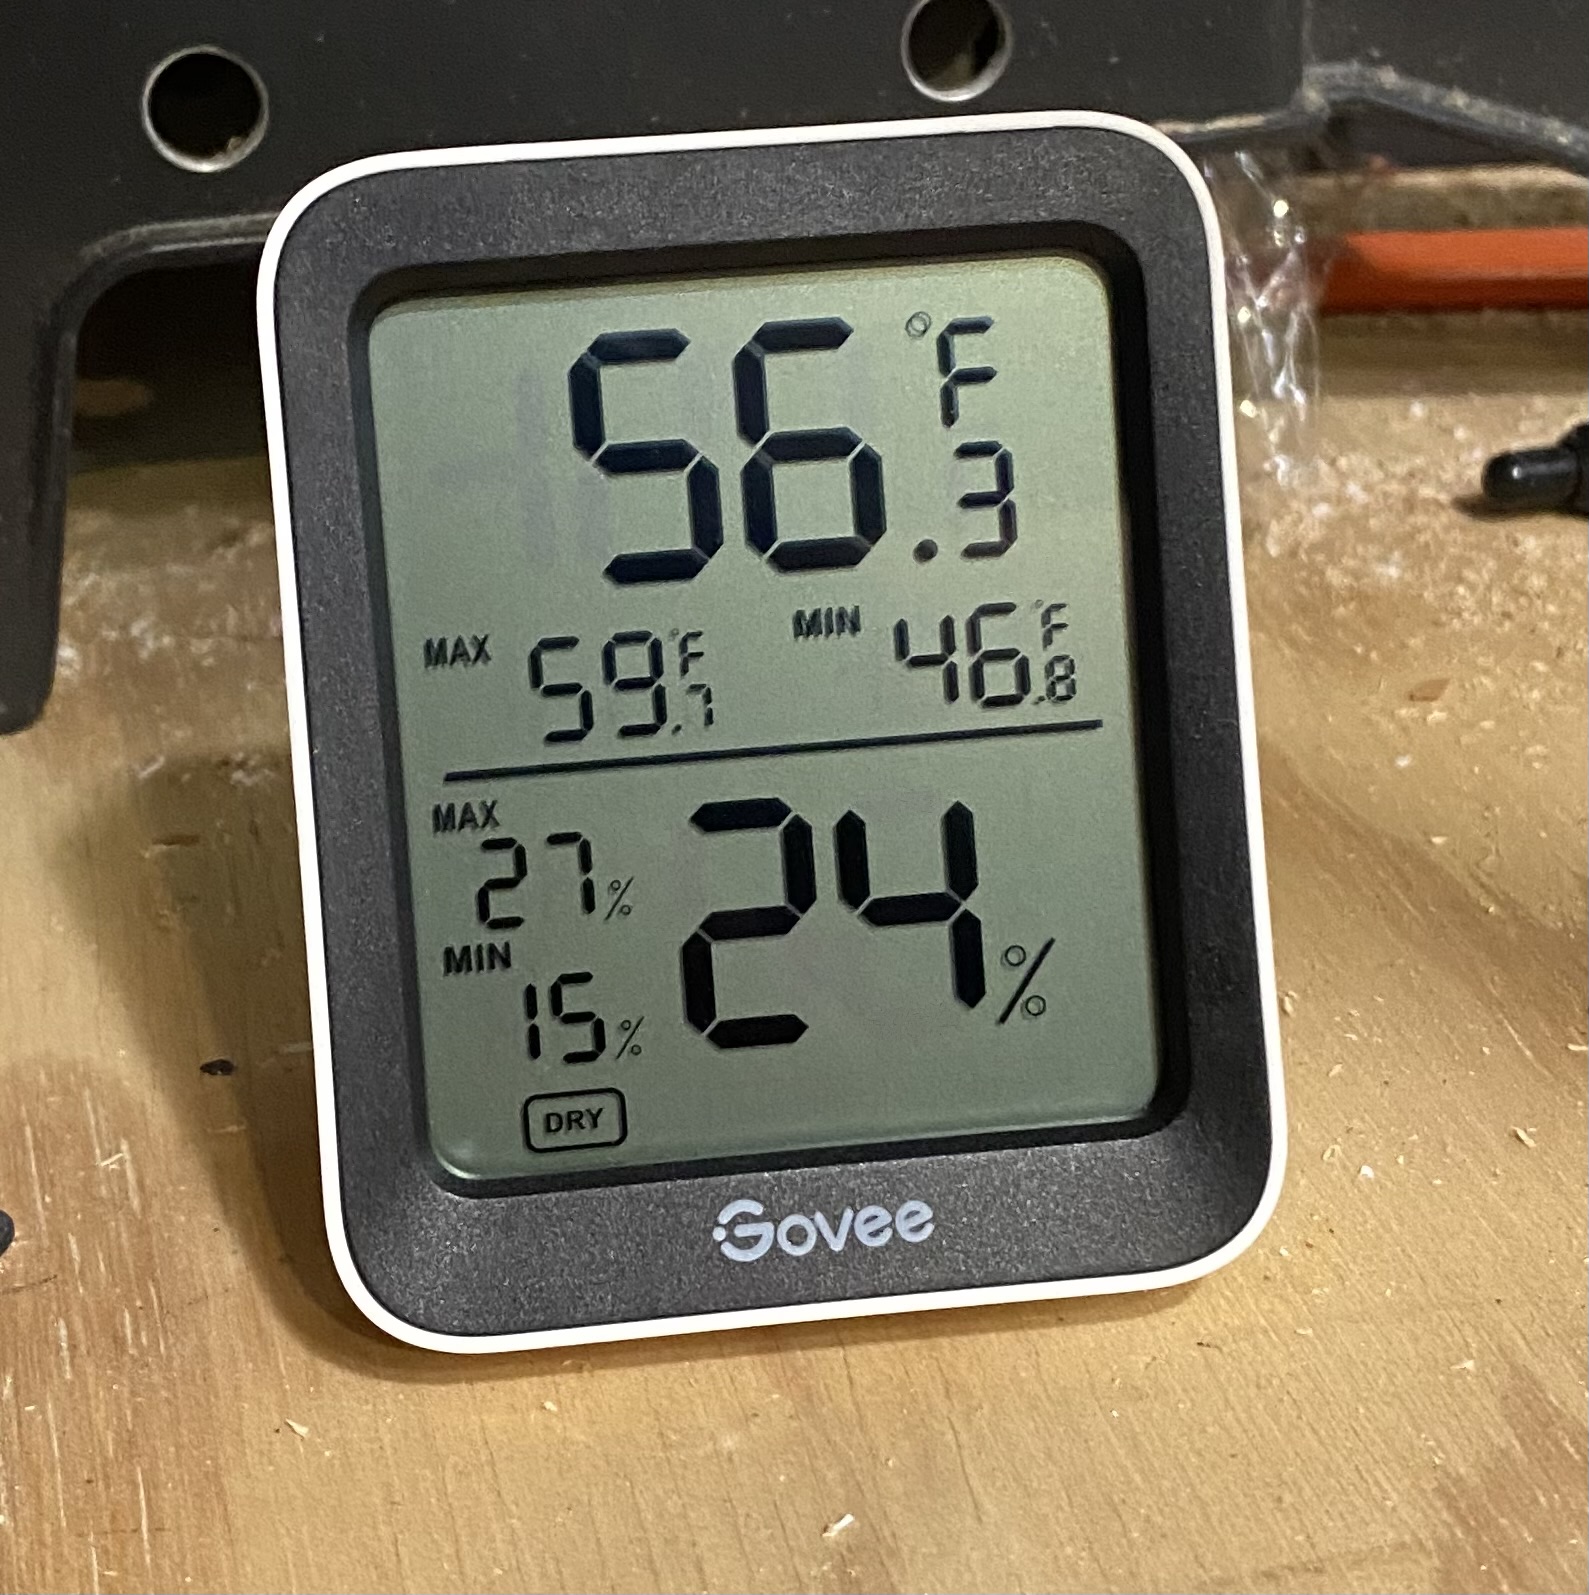 Using the Govee Bluetooth Thermometer with Home Assistant (Python